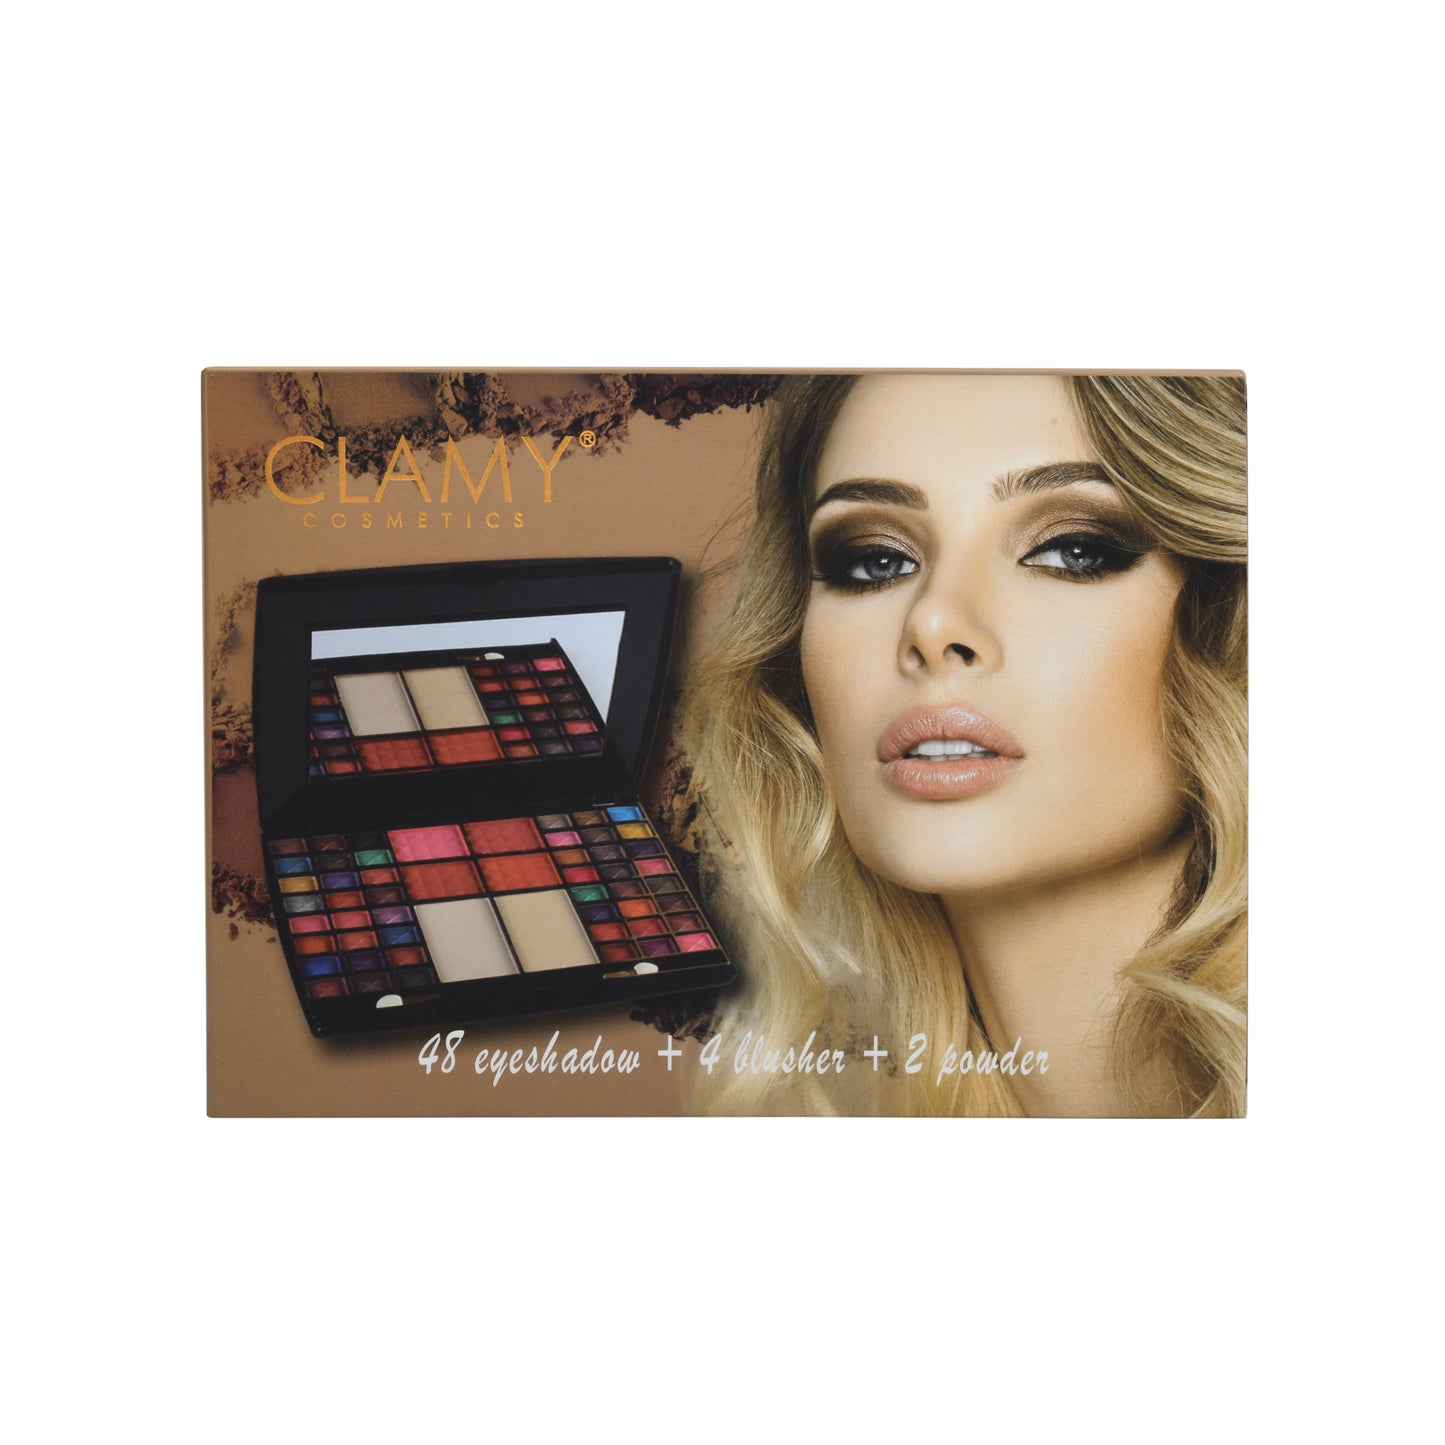 3 in 1 Ultimate 48 Color Shimmery Eyeshadow with 4 Matte Blusher & 2 Compact Powder Palette| Long wearing and Easily Blend able Eye makeup Palette with Flawless Finish-100g